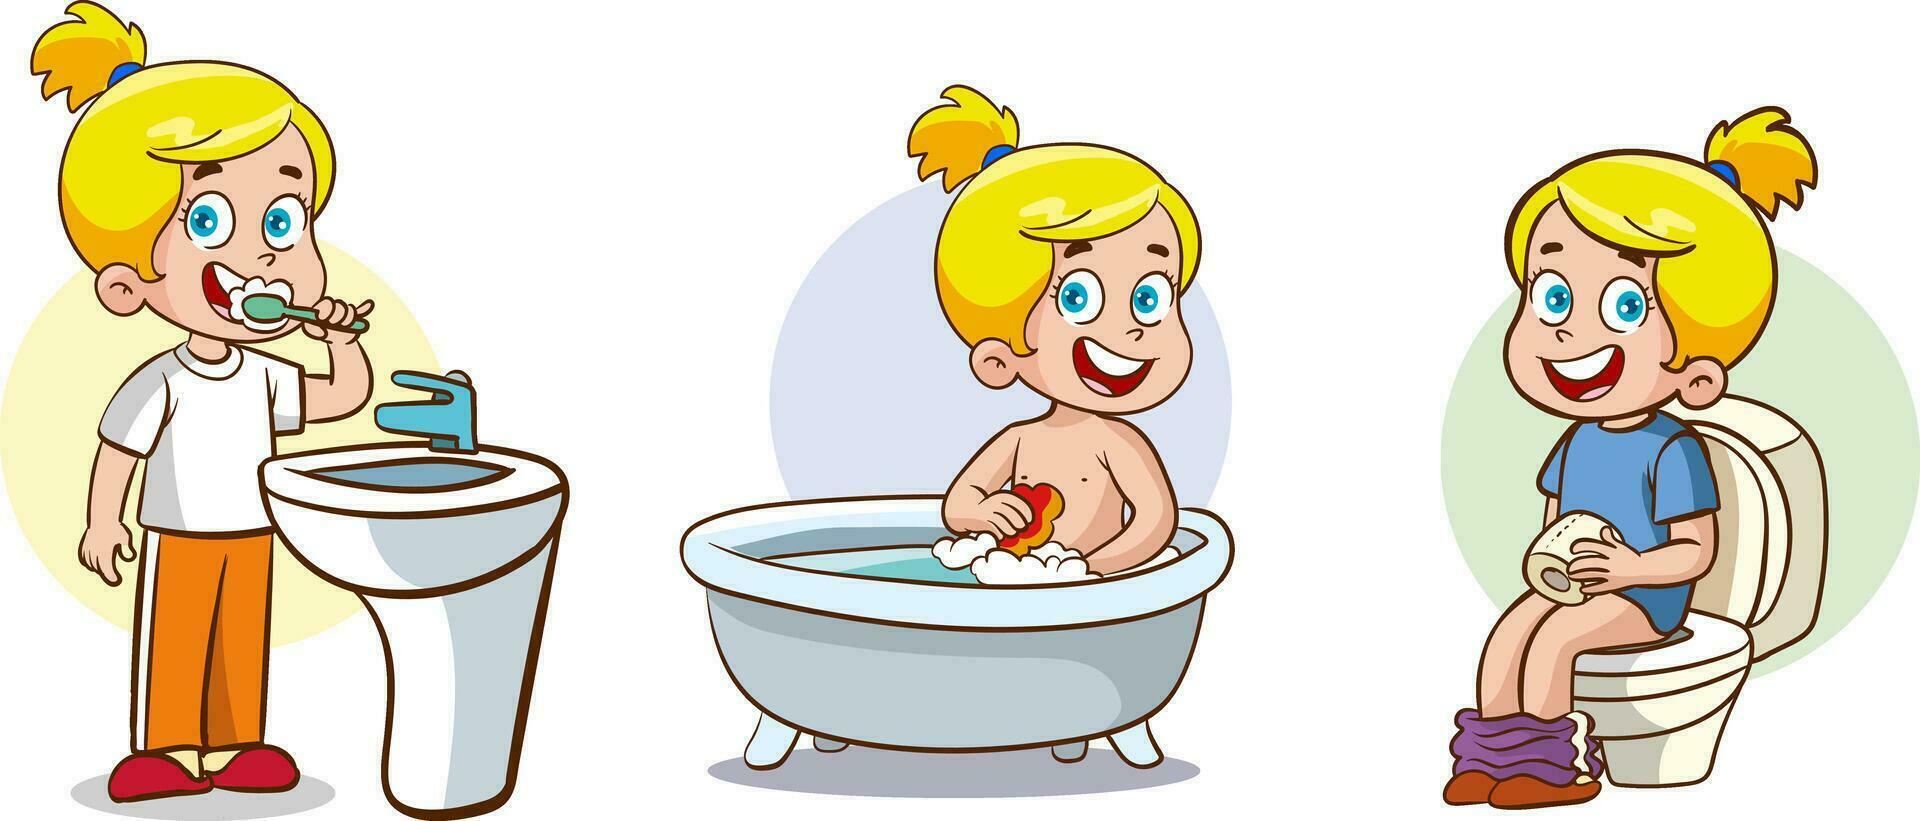 Children's daily routine in the bathroom.Vector clipart illustration. vector